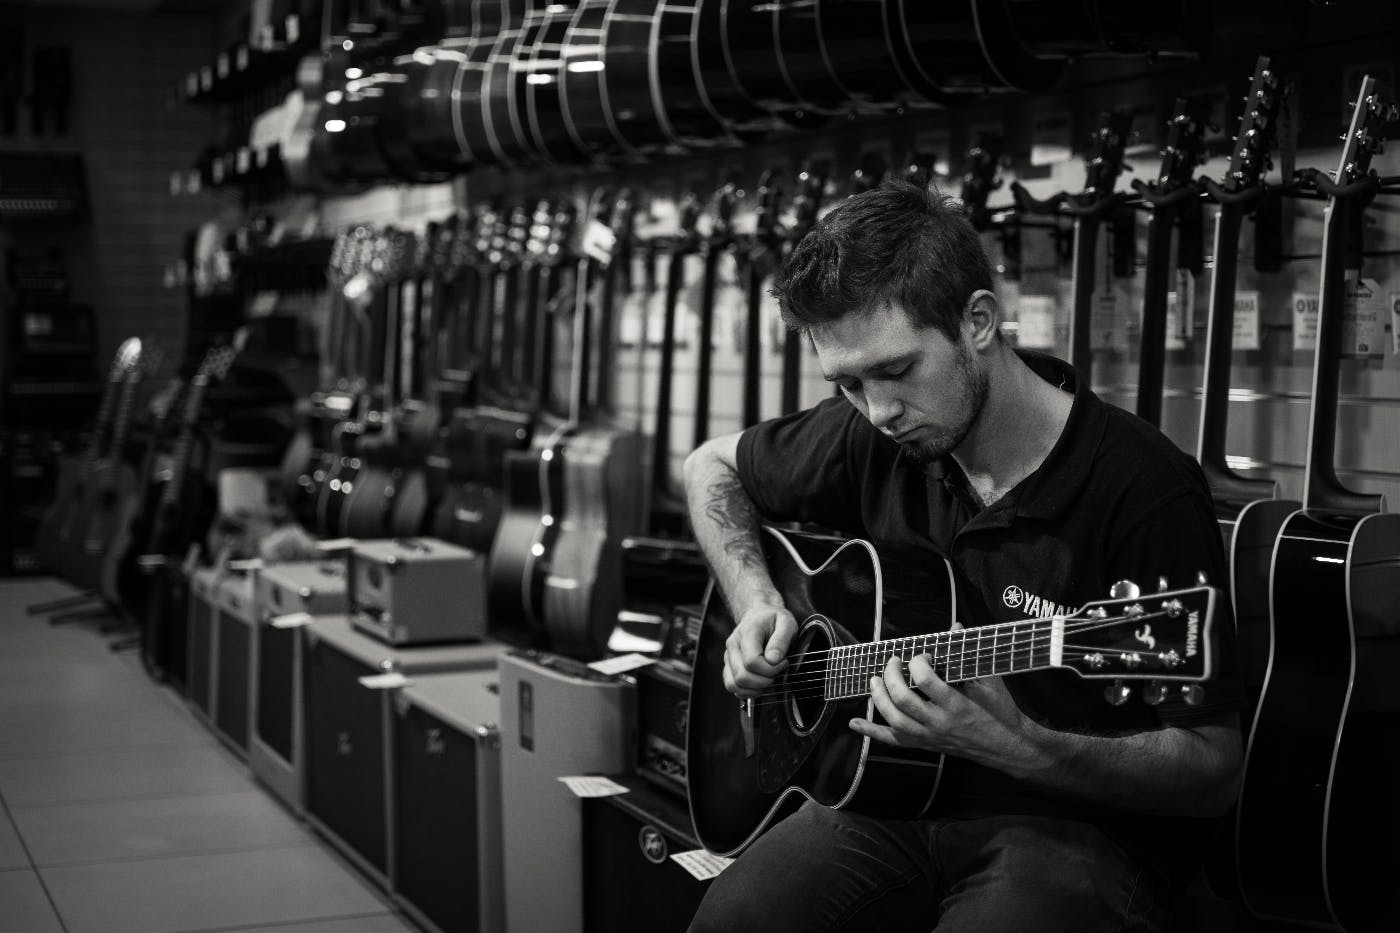 A guy playing an acoustic guitar in front of a wall of guitars